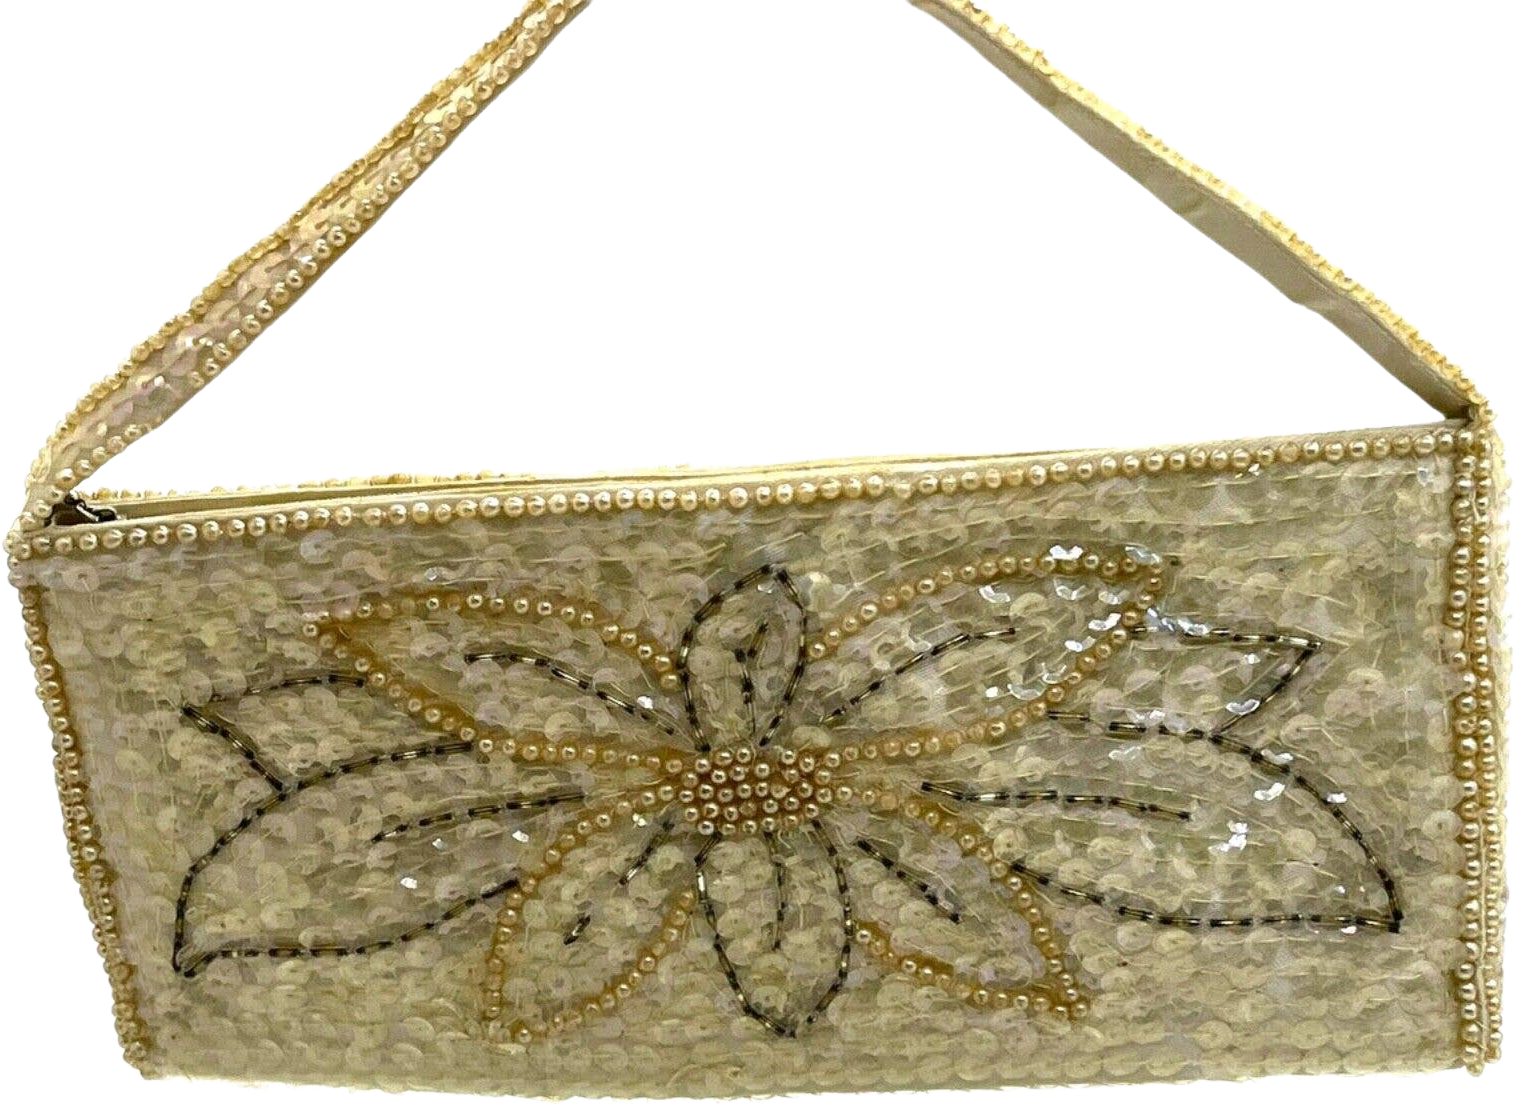 Vintage 50s Beads And Sequins Evening Bag By La Regale | Shop THRILLING